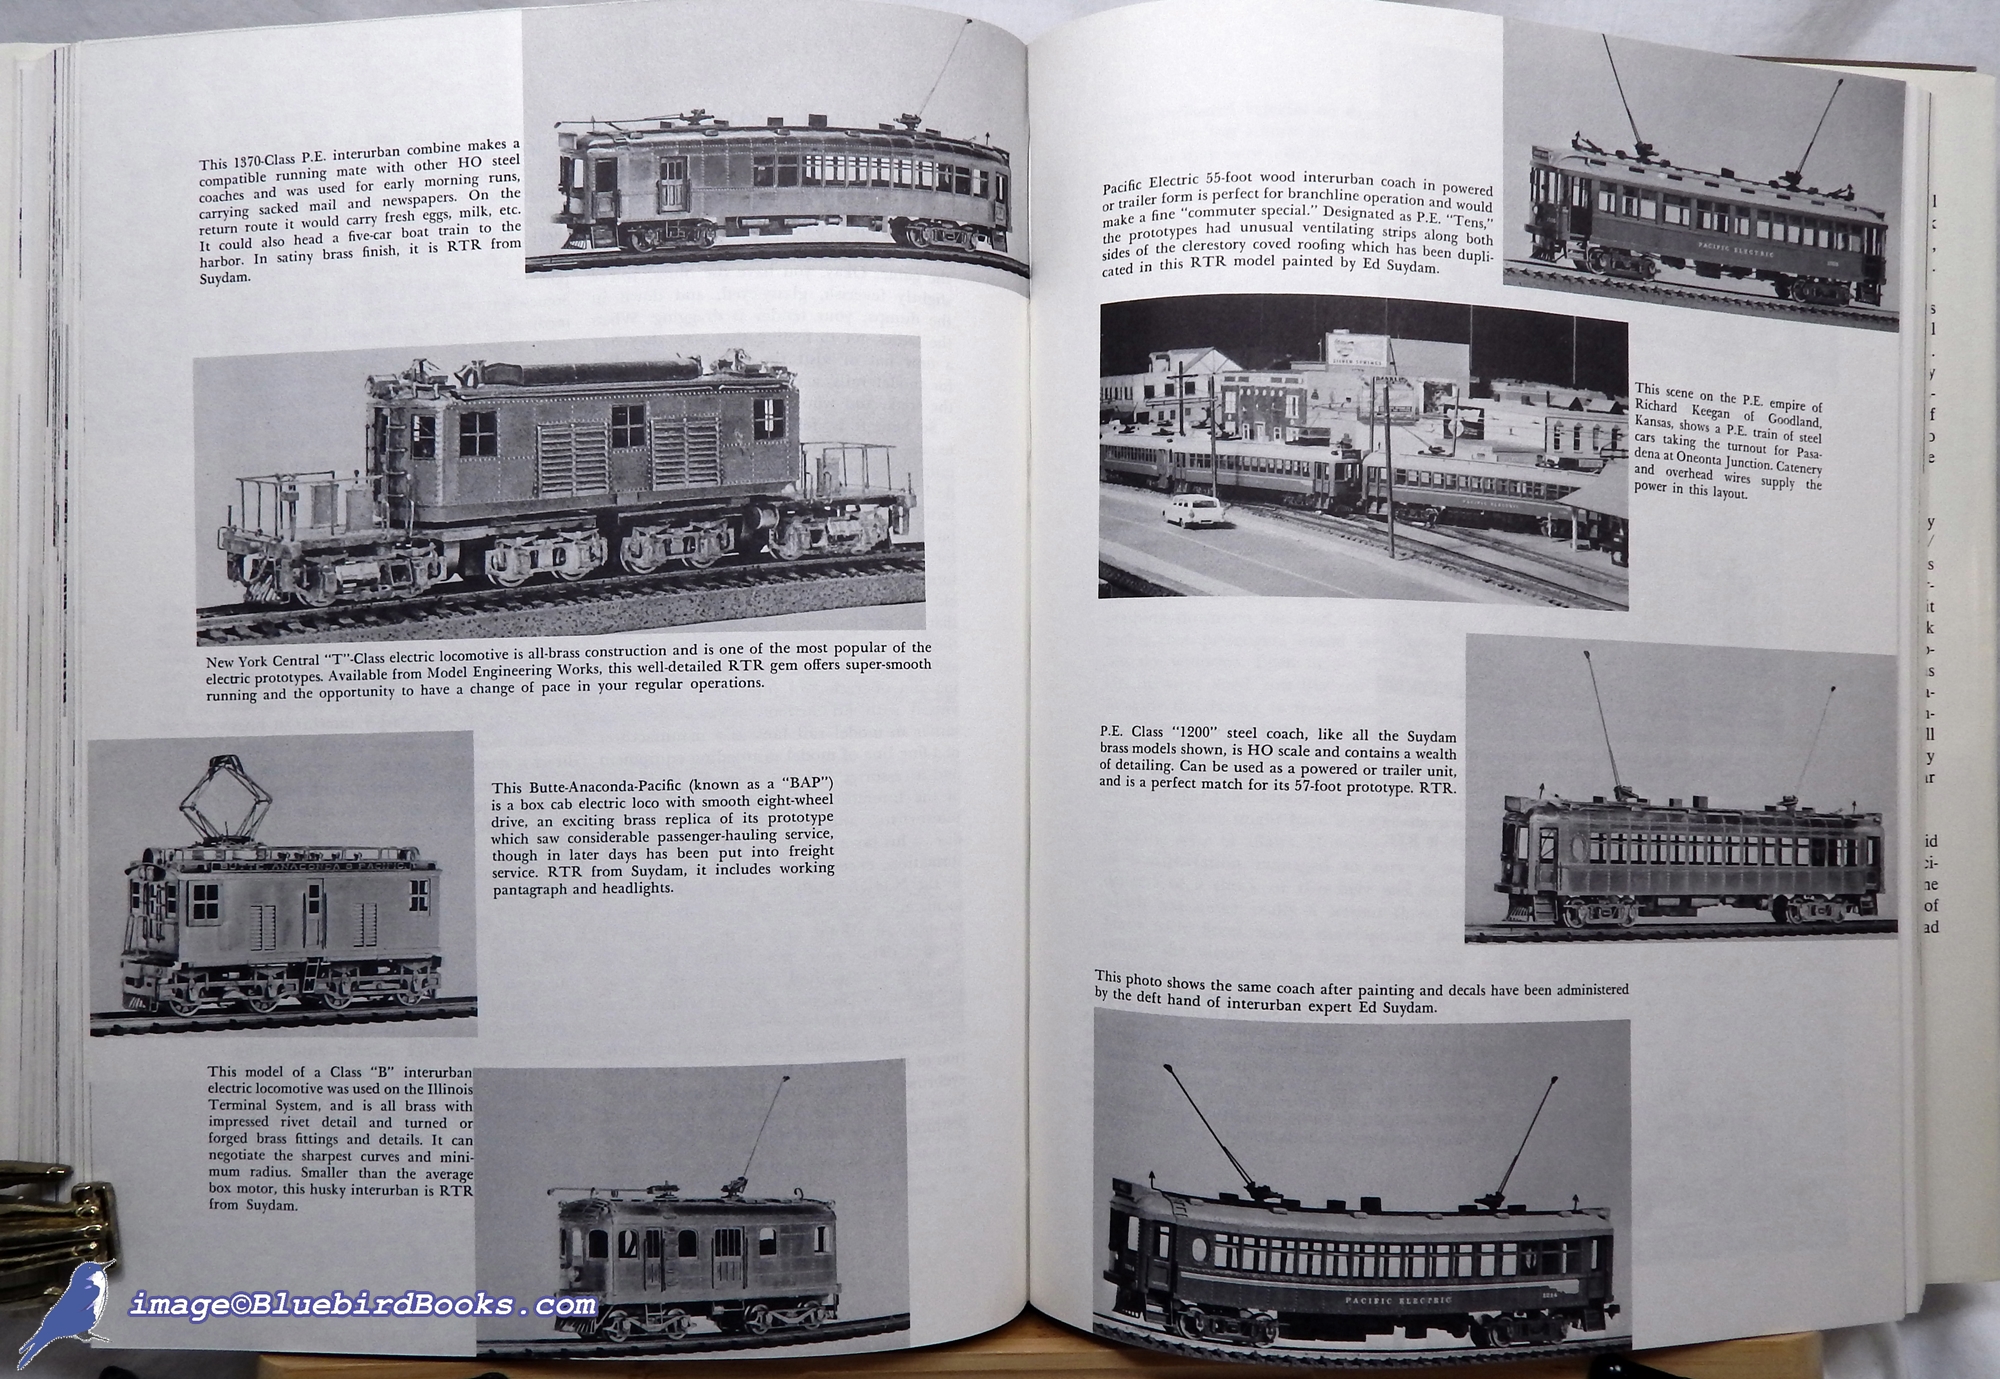 The Complete Book of Model Railroading